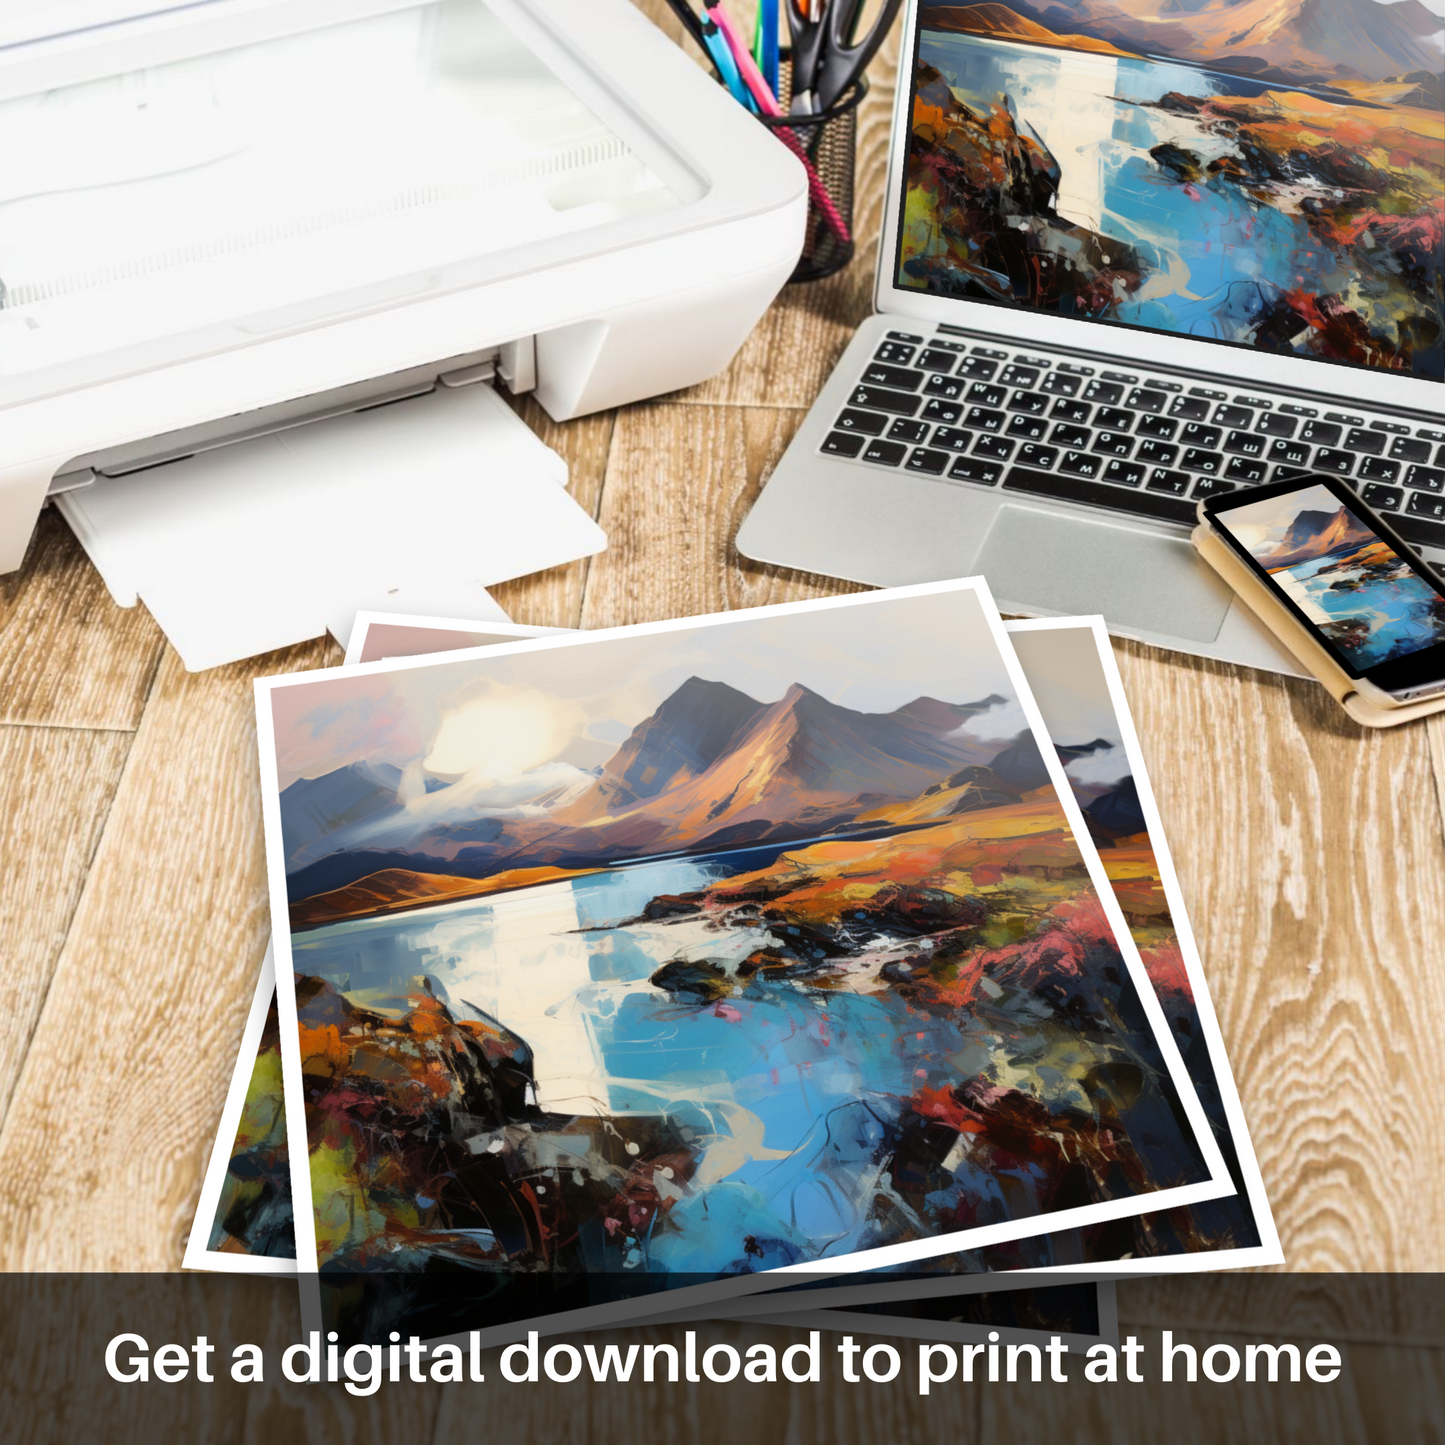 Downloadable and printable picture of The Cuillin, Isle of Skye